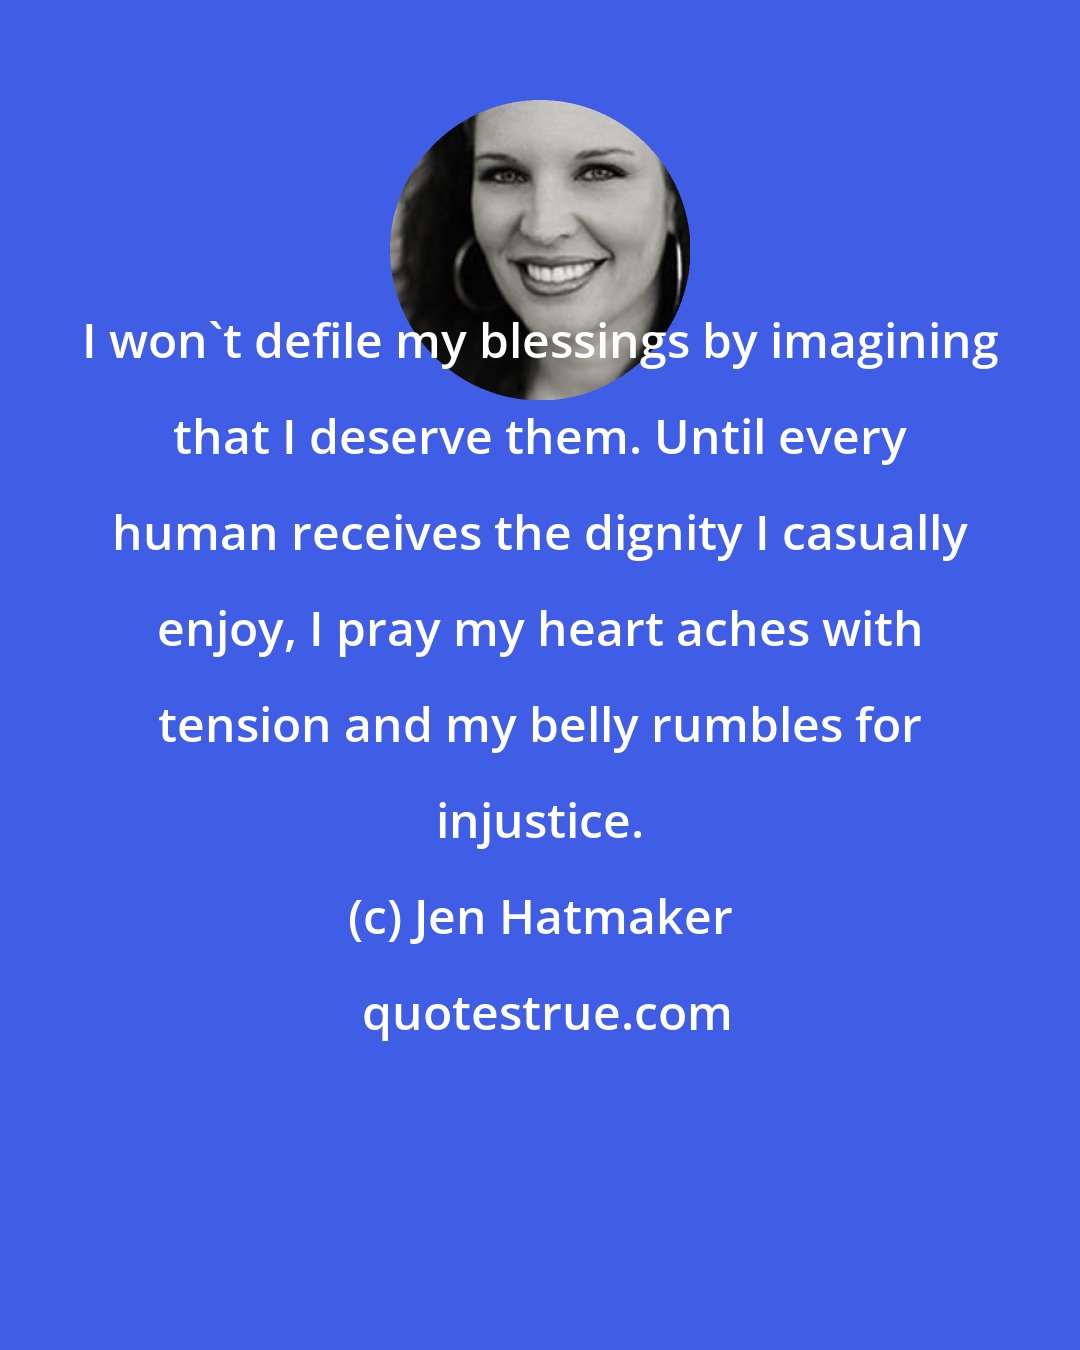 Jen Hatmaker: I won't defile my blessings by imagining that I deserve them. Until every human receives the dignity I casually enjoy, I pray my heart aches with tension and my belly rumbles for injustice.